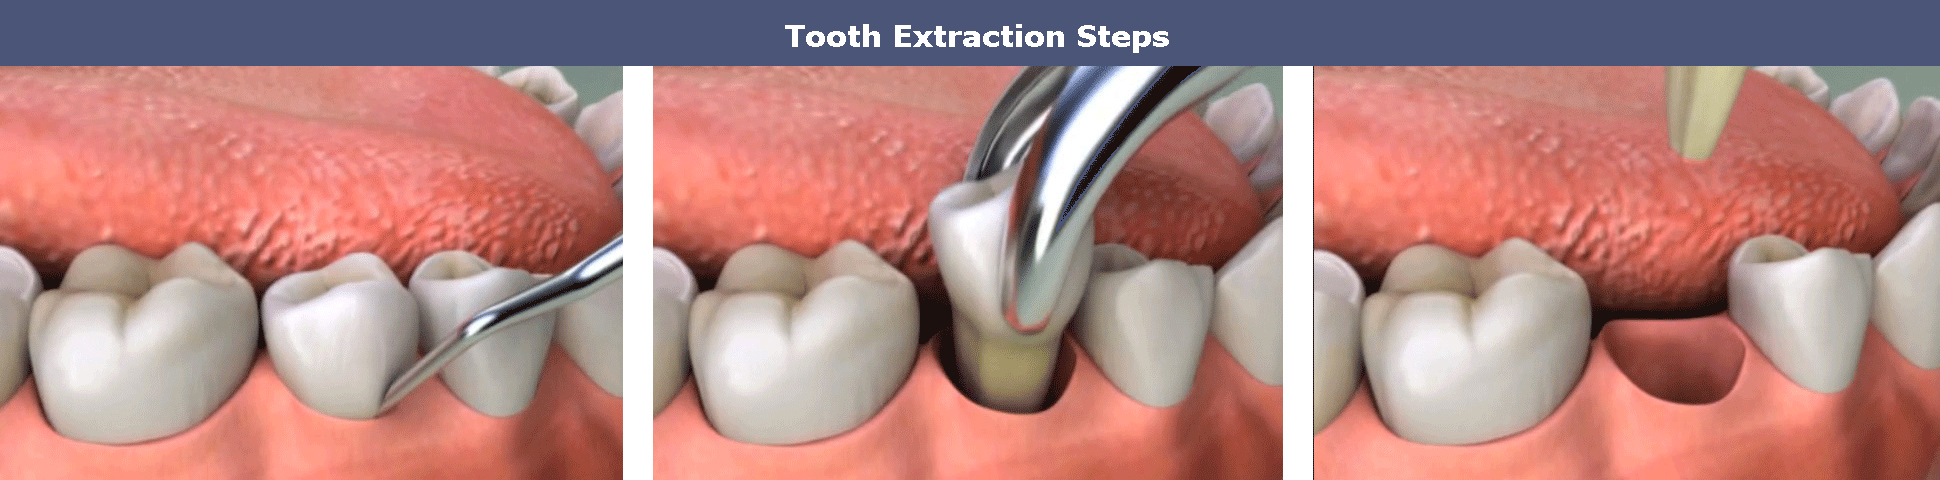 Tooth extraction steps